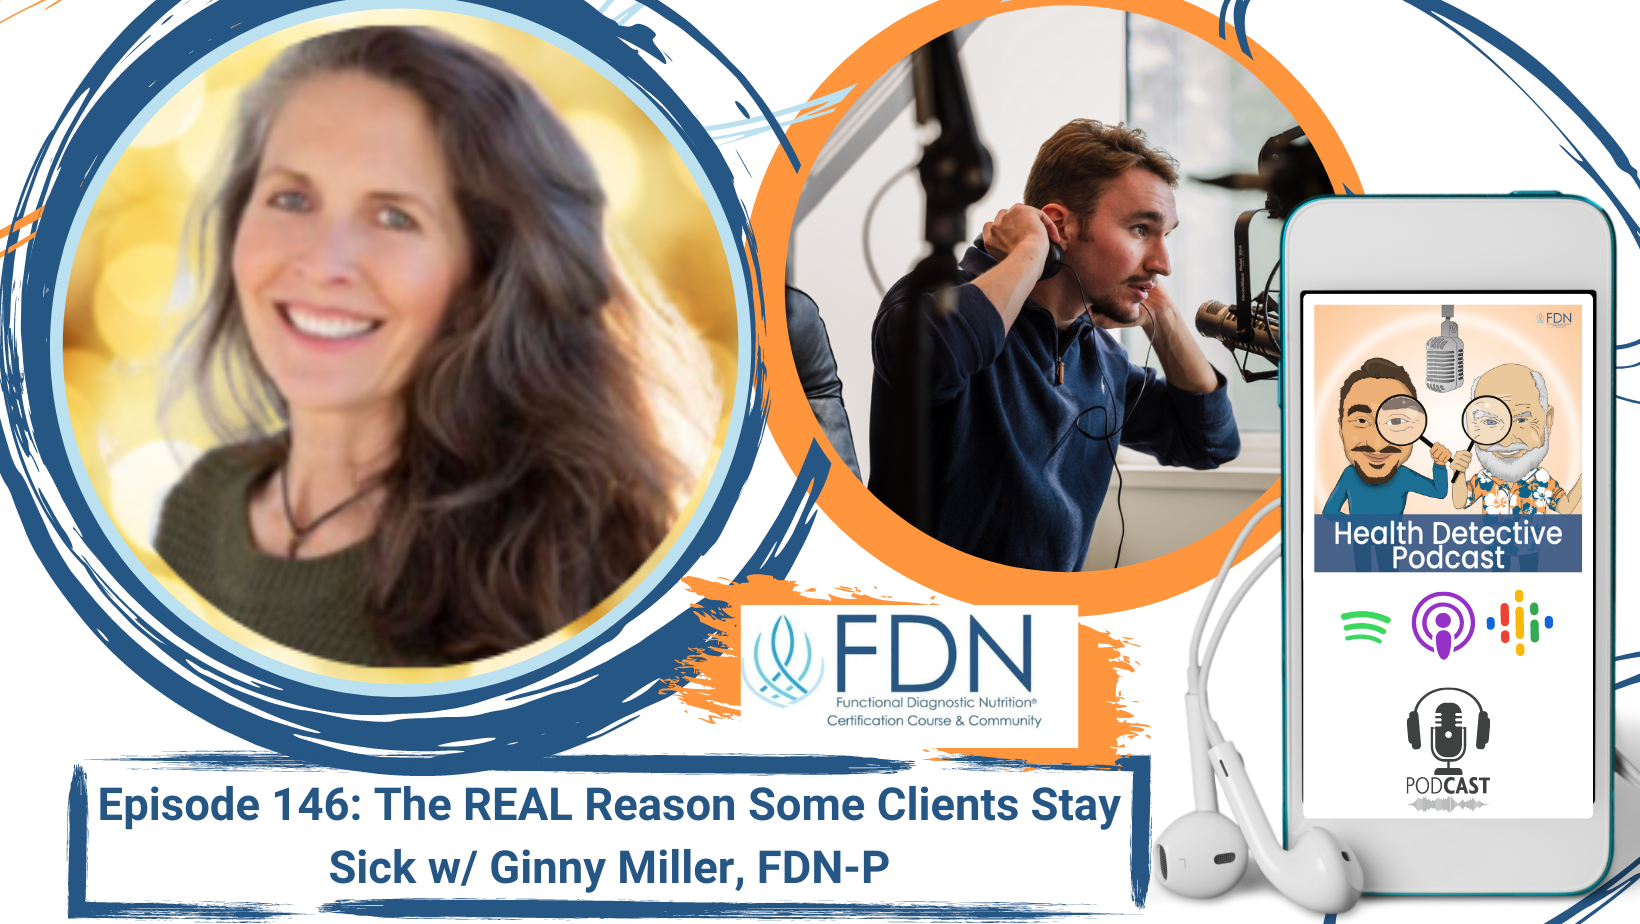 HEADSHOT GINNY MILLER, The REAL Reason Some Clients Stay Sick, FDN, FDNTRAINING, HEALTH DETECTIVE PODCAST